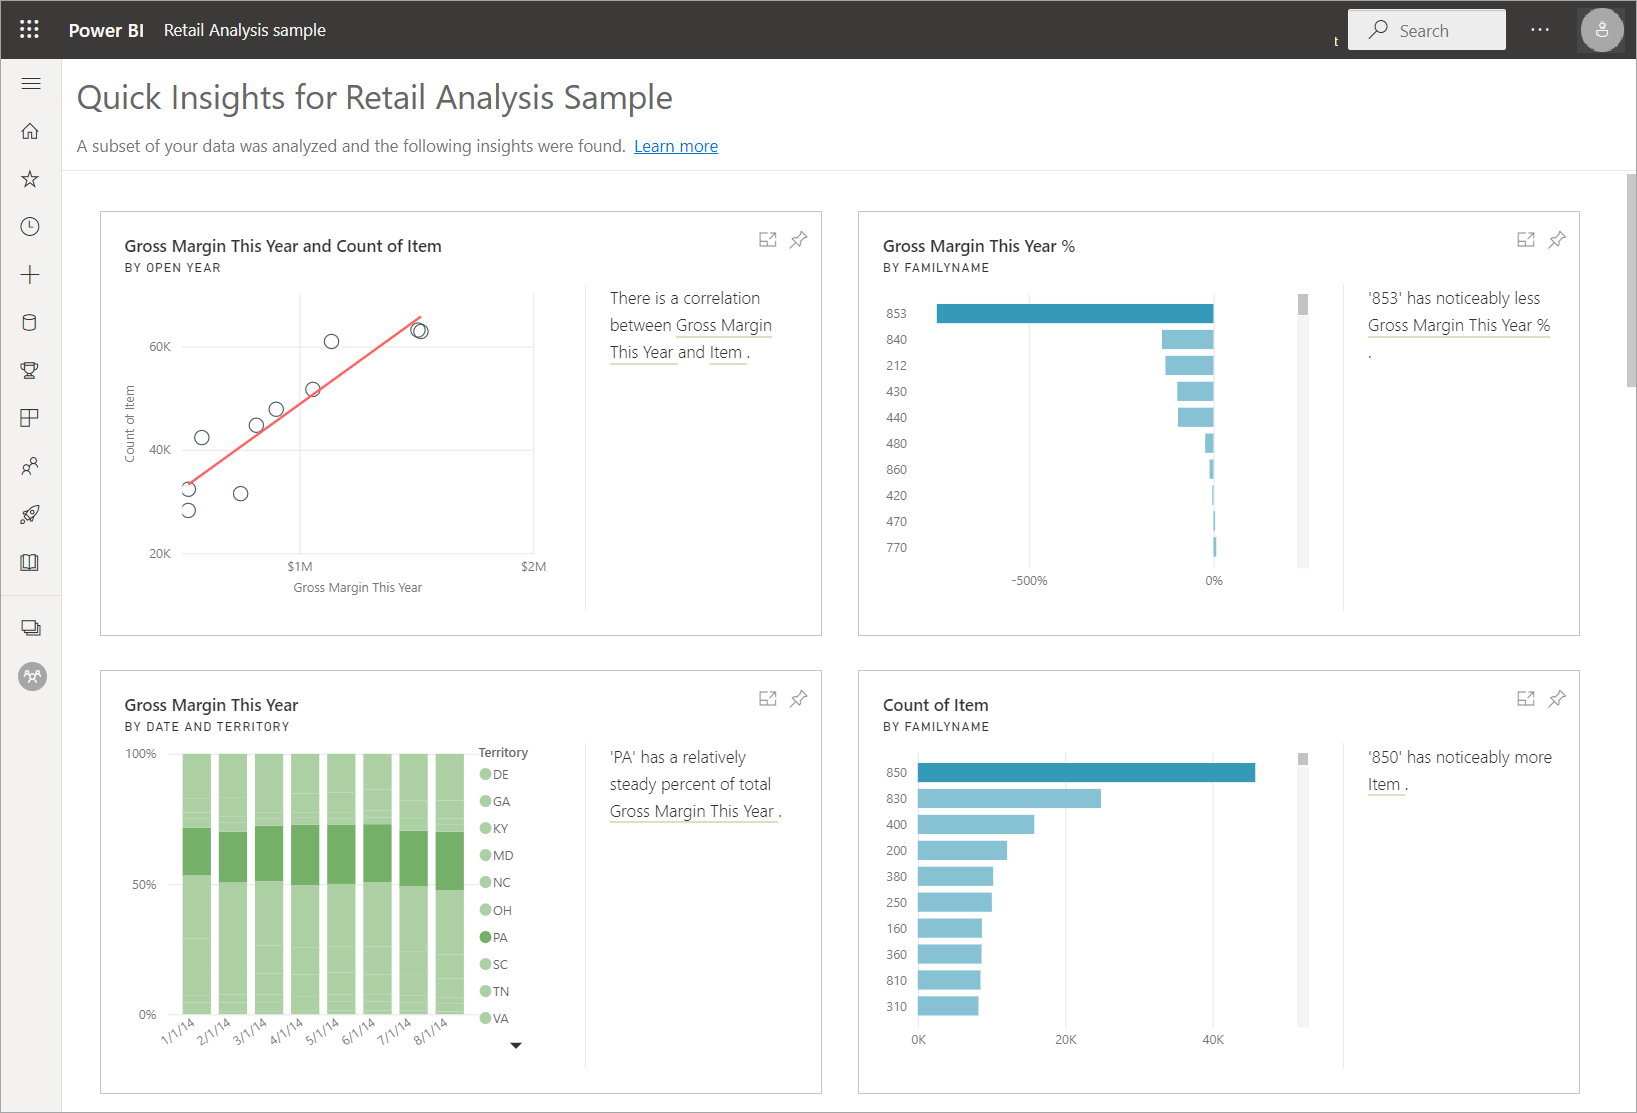 Screenshot showing the insights report for the Retail Analysis Sample.